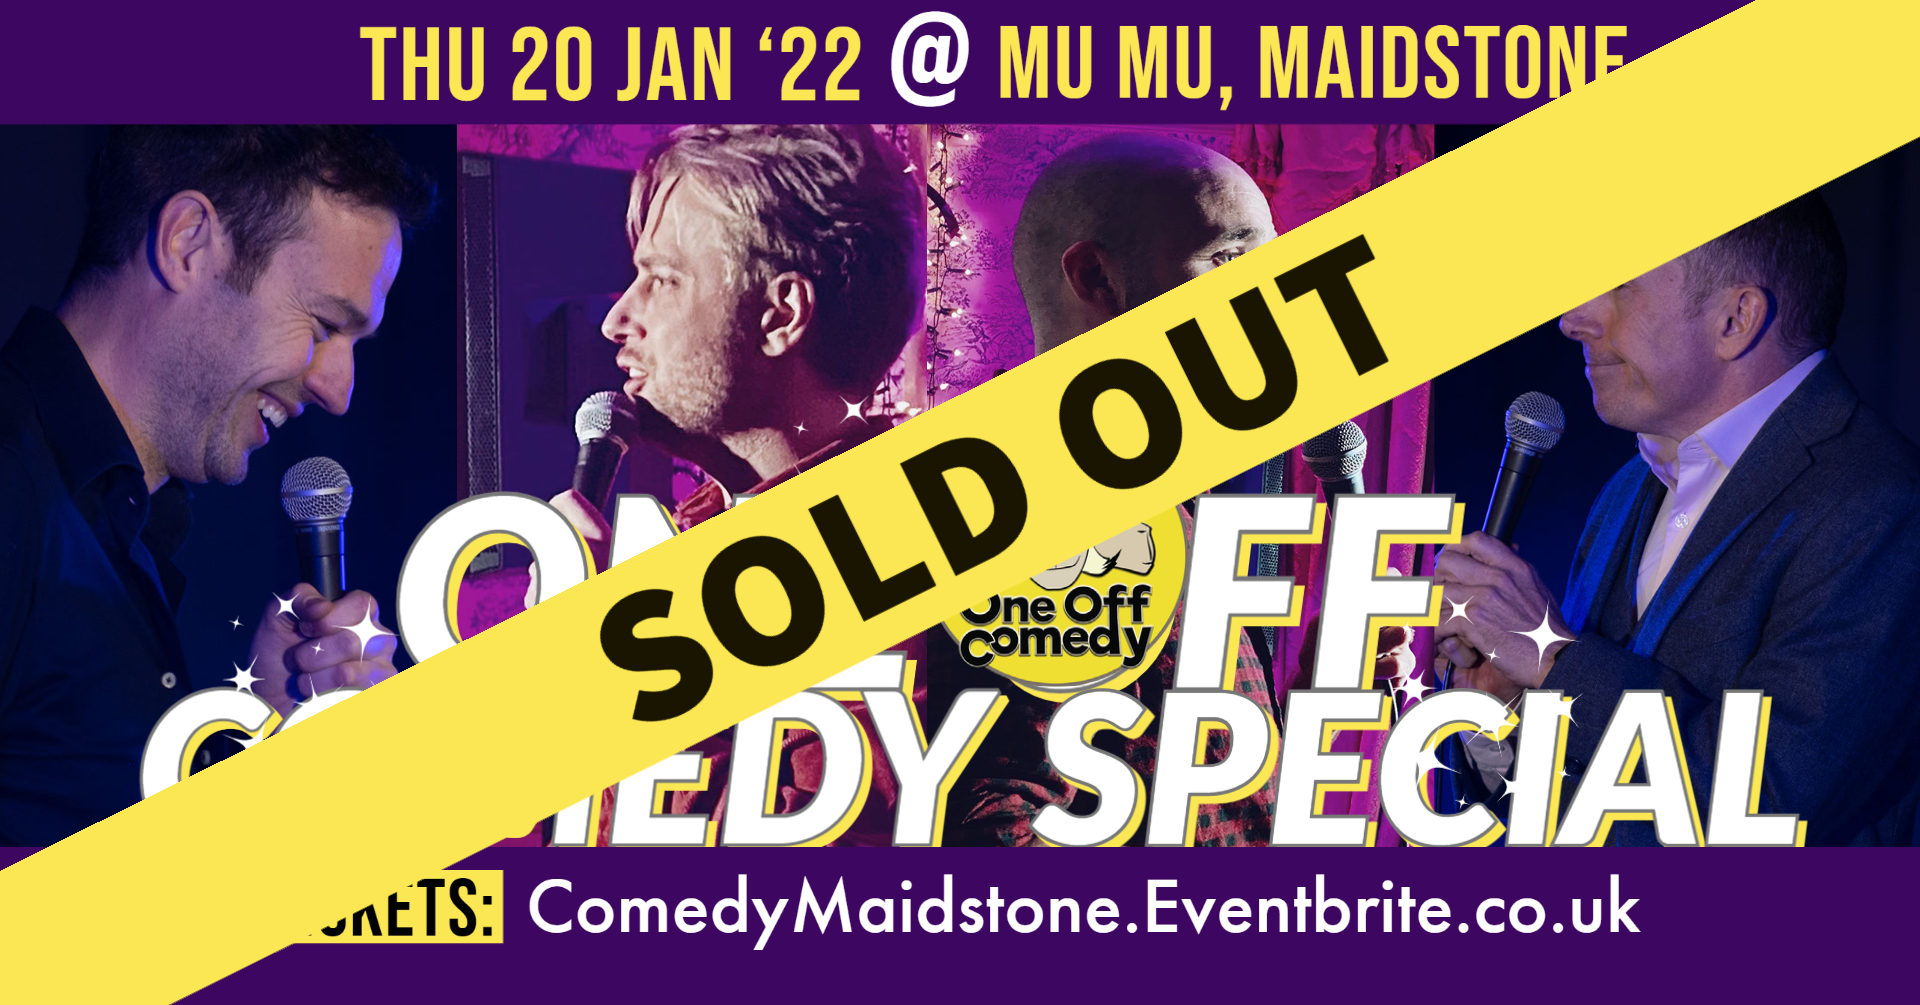 Maidstone - One Off Comedy Special at MU MU!! - One Off Comedy